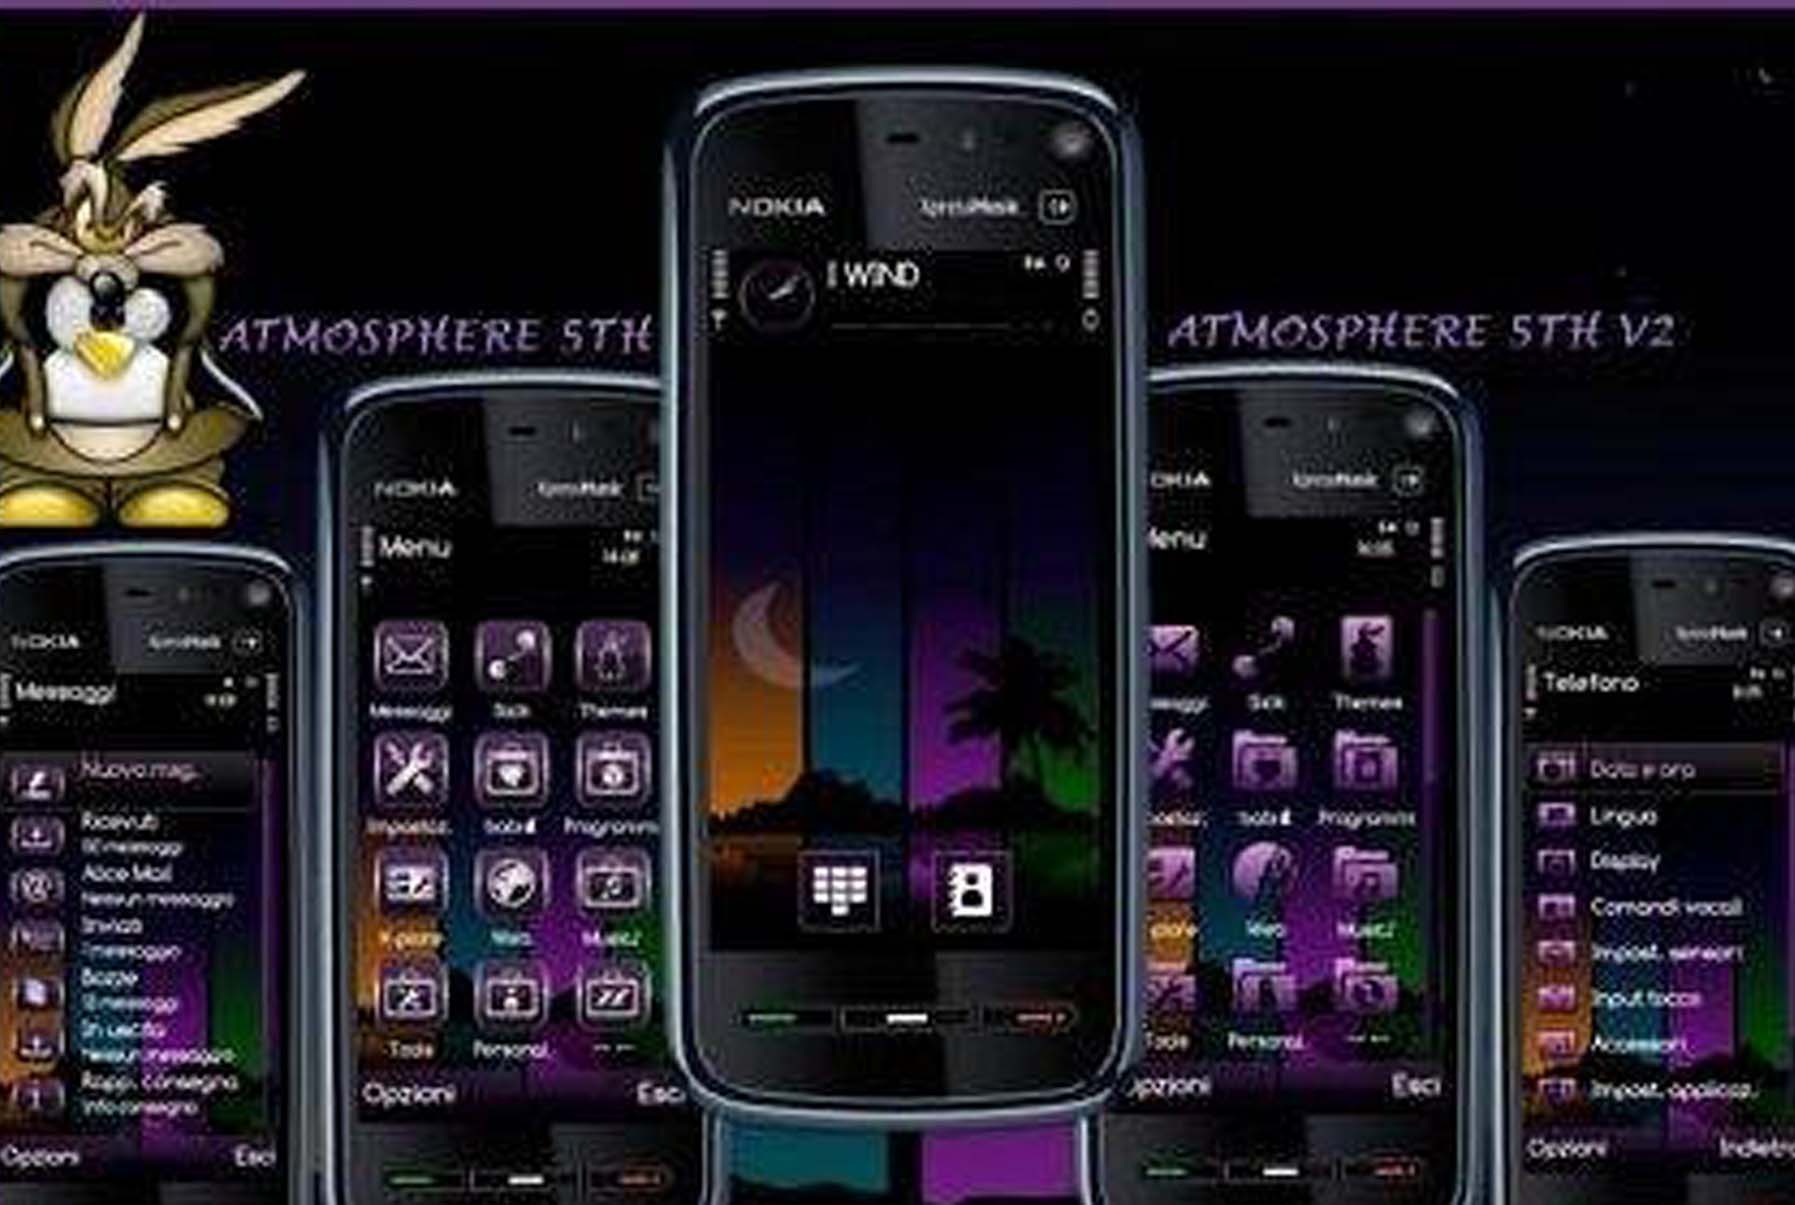 http://gongon.ucoz.ru/JPG1/Exclusive_Themes_for_Nokia-Symbian_9.4_Touch-.jpeg